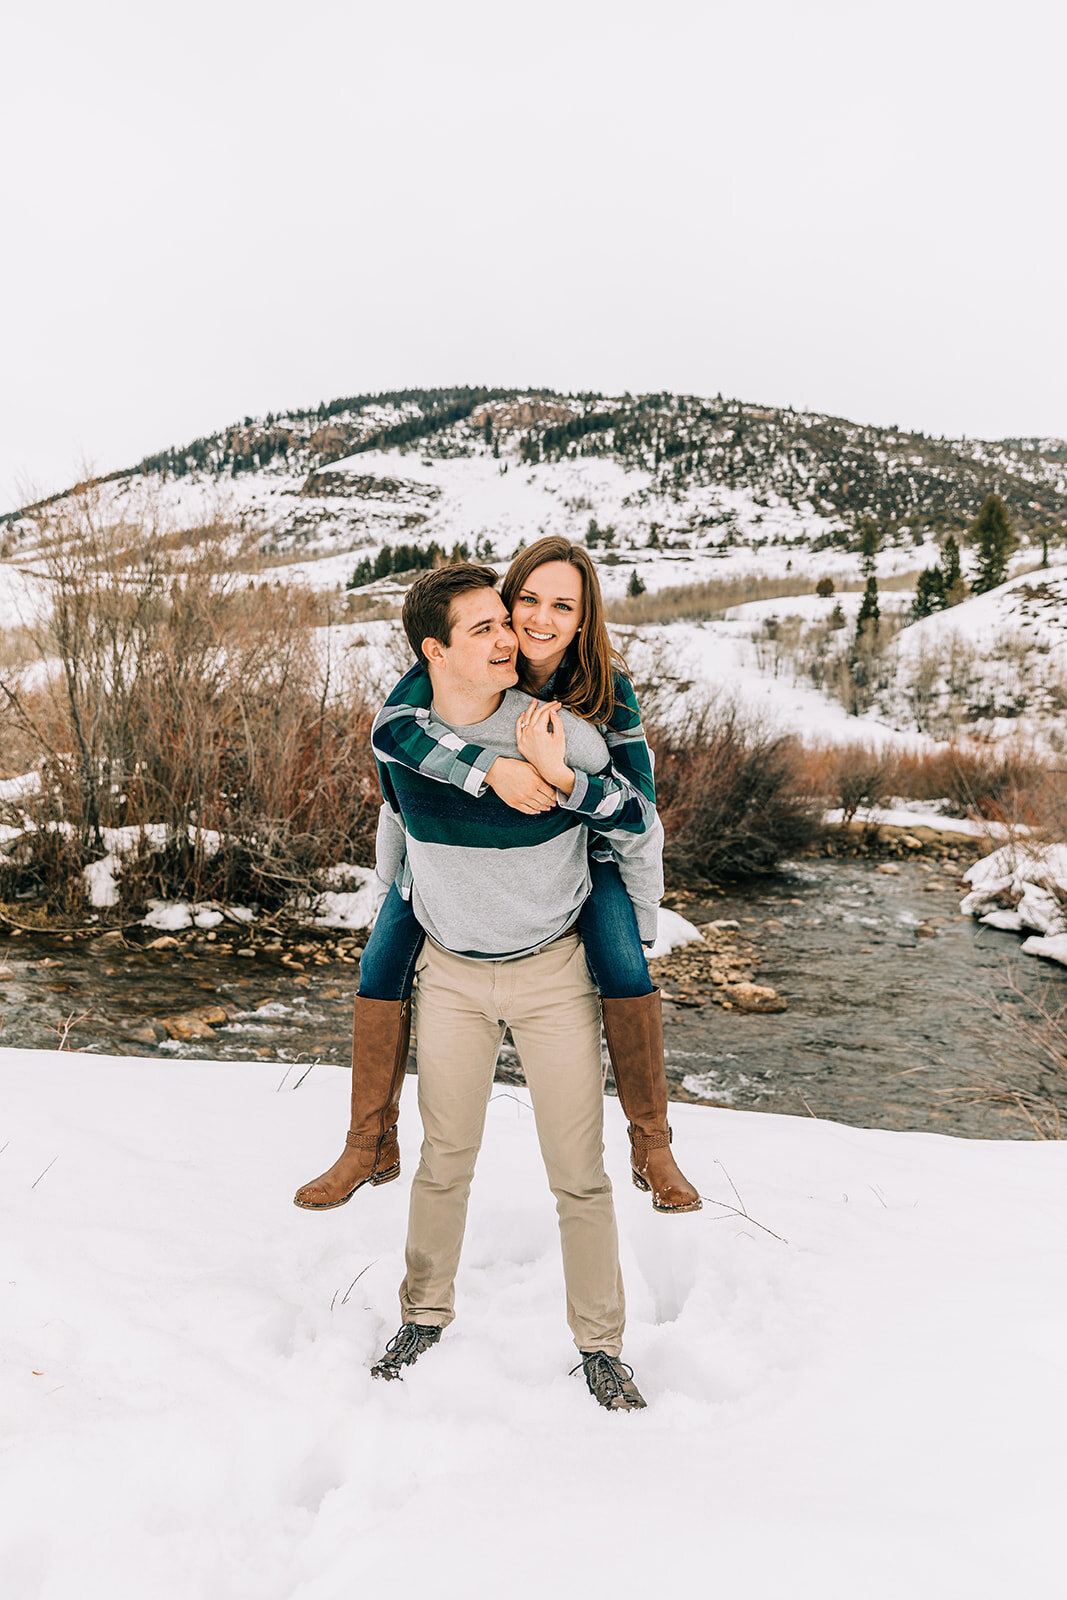  playful couple pose inspiration glowing couple happy couple logan canyon photo shoot session for newly engaged couple engagement session in the snow winter engagement session bella alder photography utah photographer winter outdoor photo shoot inspi